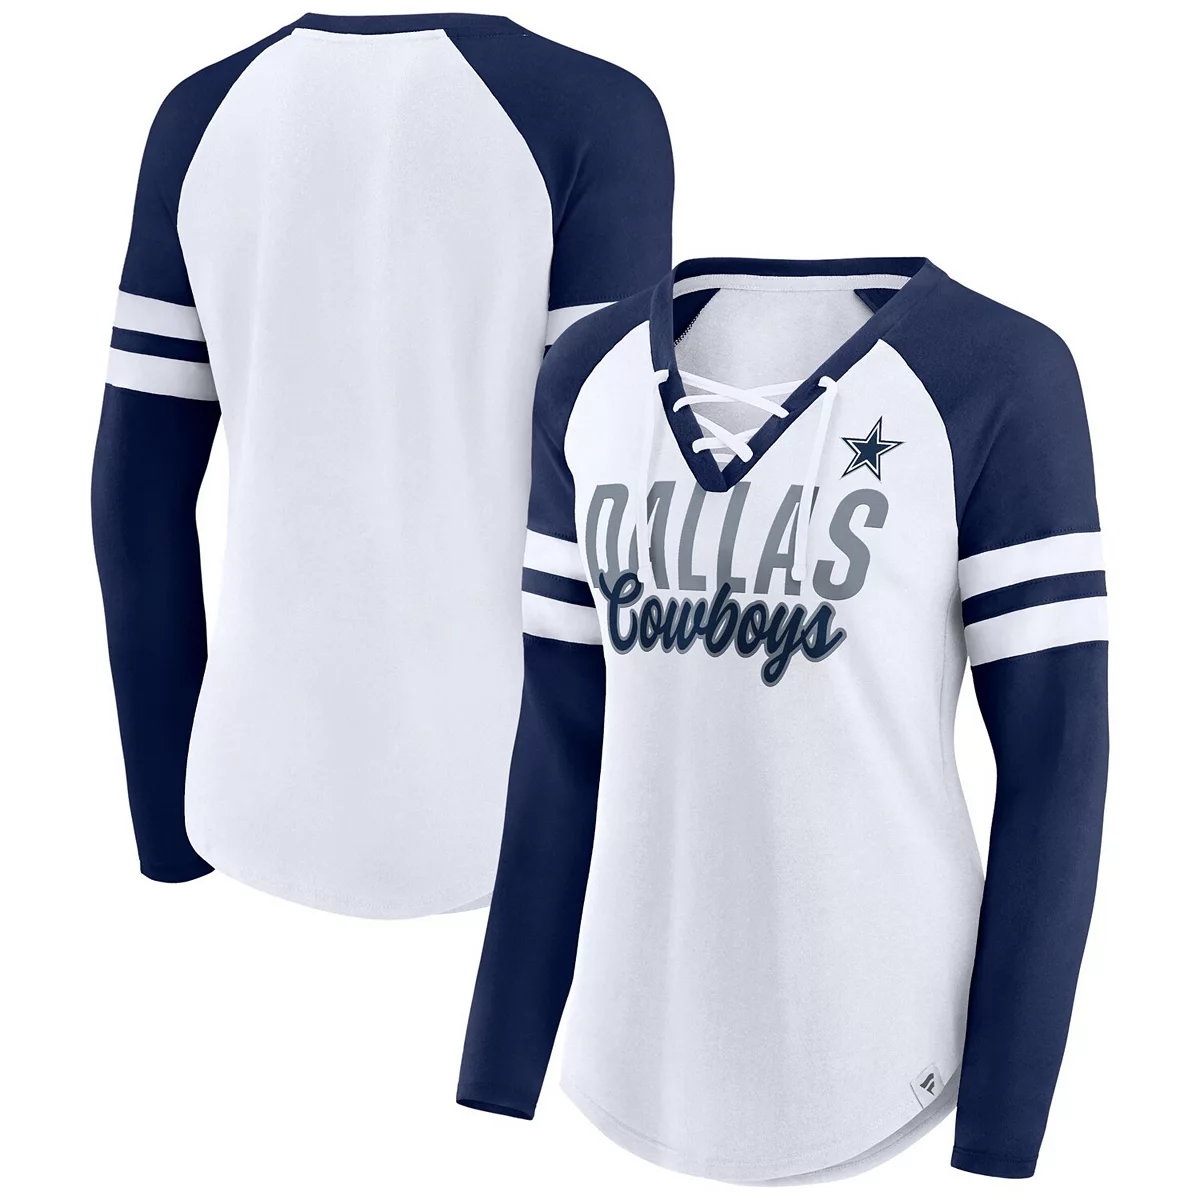 DALLAS COWBOYS WOMEN'S TRUE TO FORM LACE-UP V-NECK  LONG SLEEVE